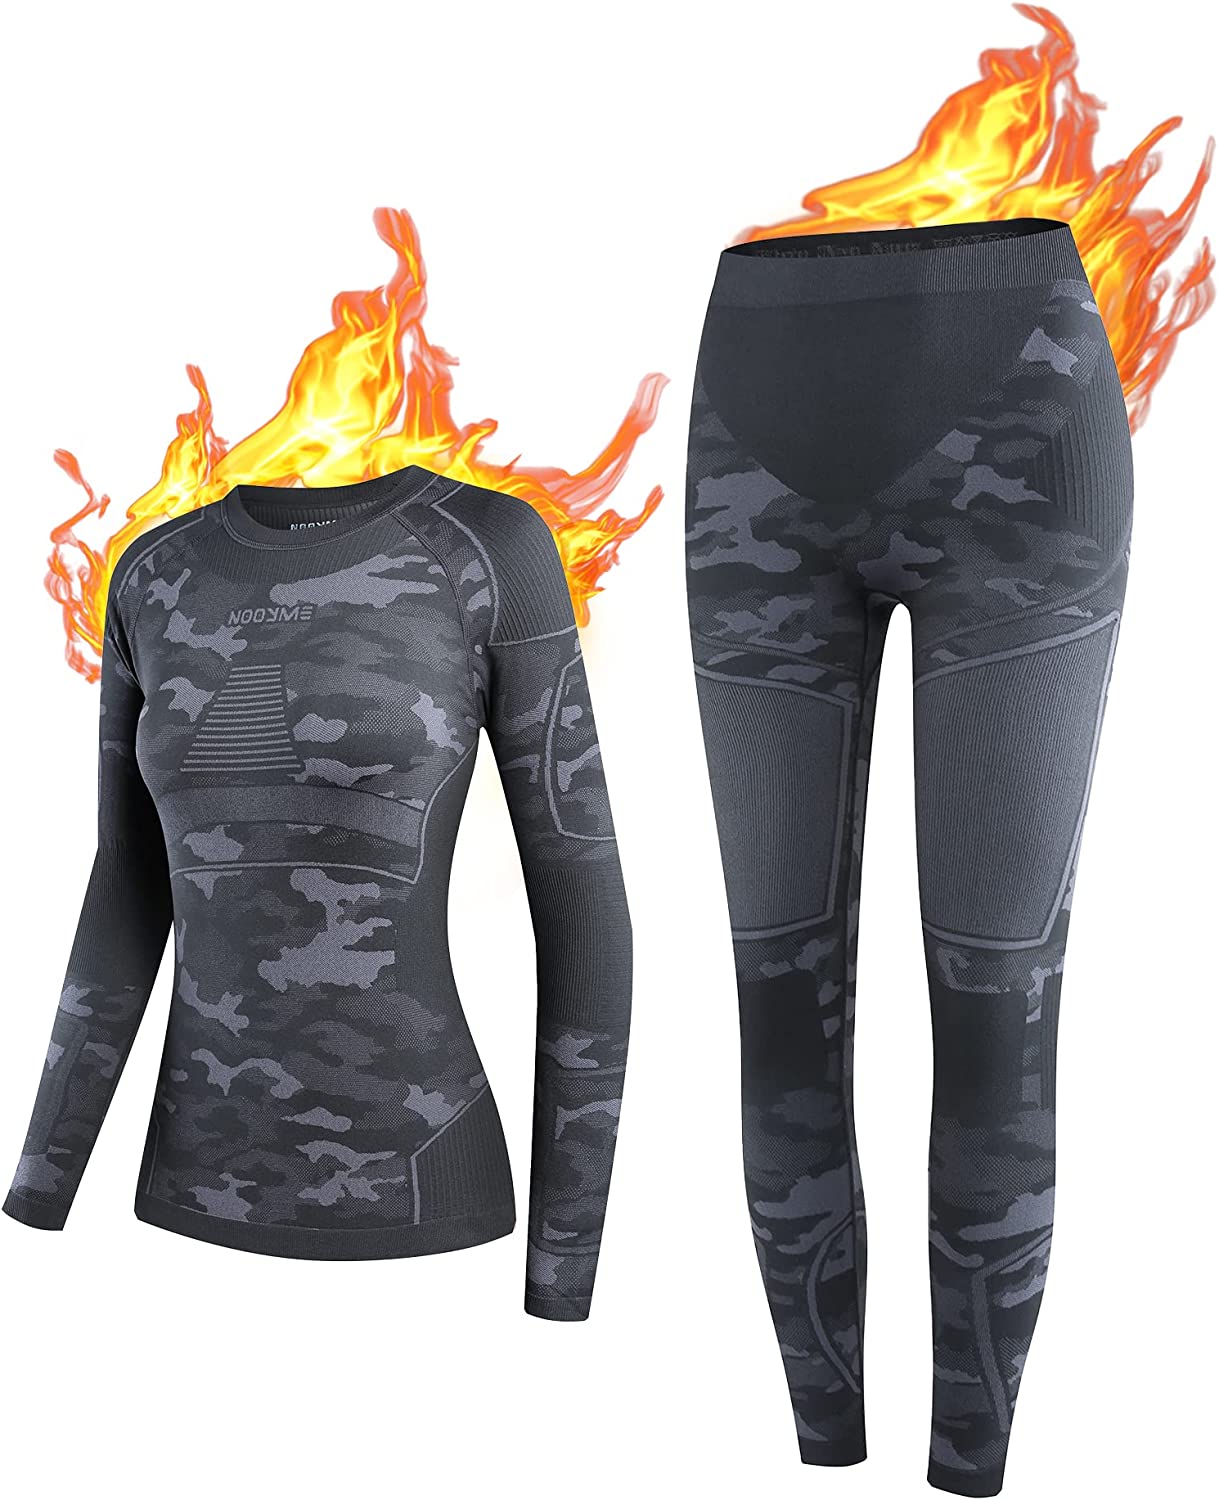 NOOYME Thermal Underwear for Women Long Johns for Women